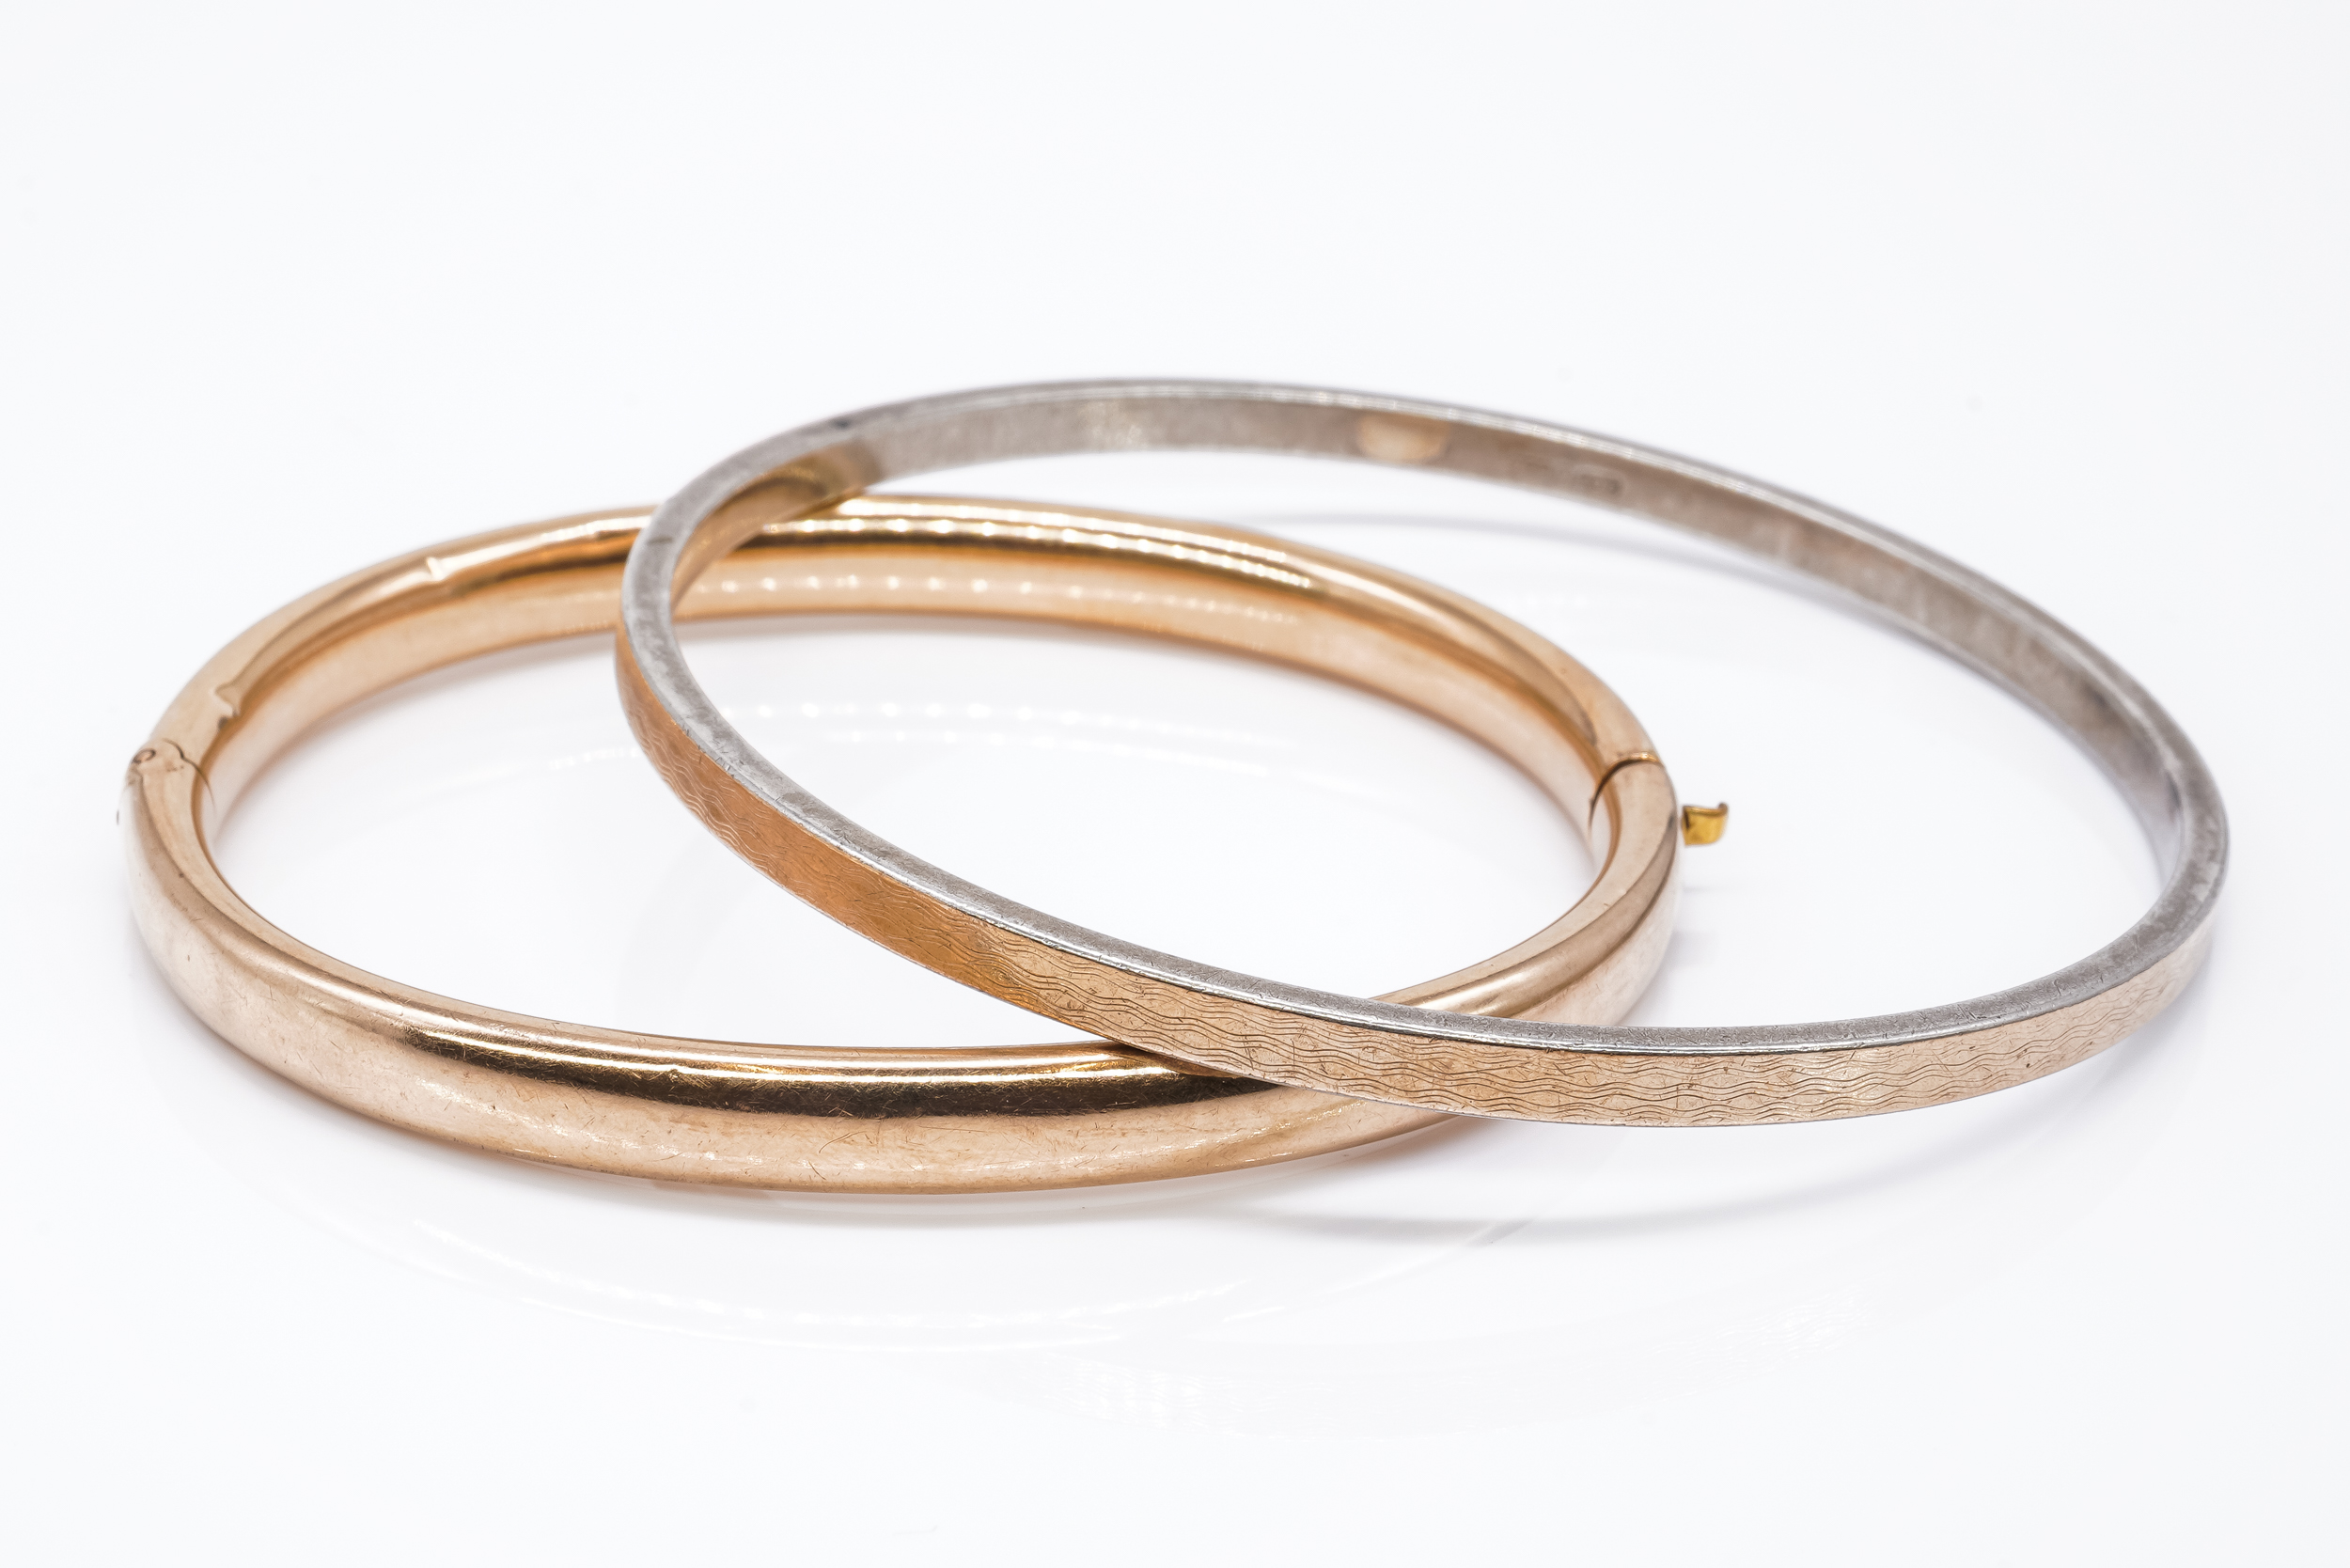 A GOLD HOLLOW OVAL HINGED BANGLE TOGETHER WITH A SILVER AND GOLD FRONTED CIRCULAR BANGLE (2)